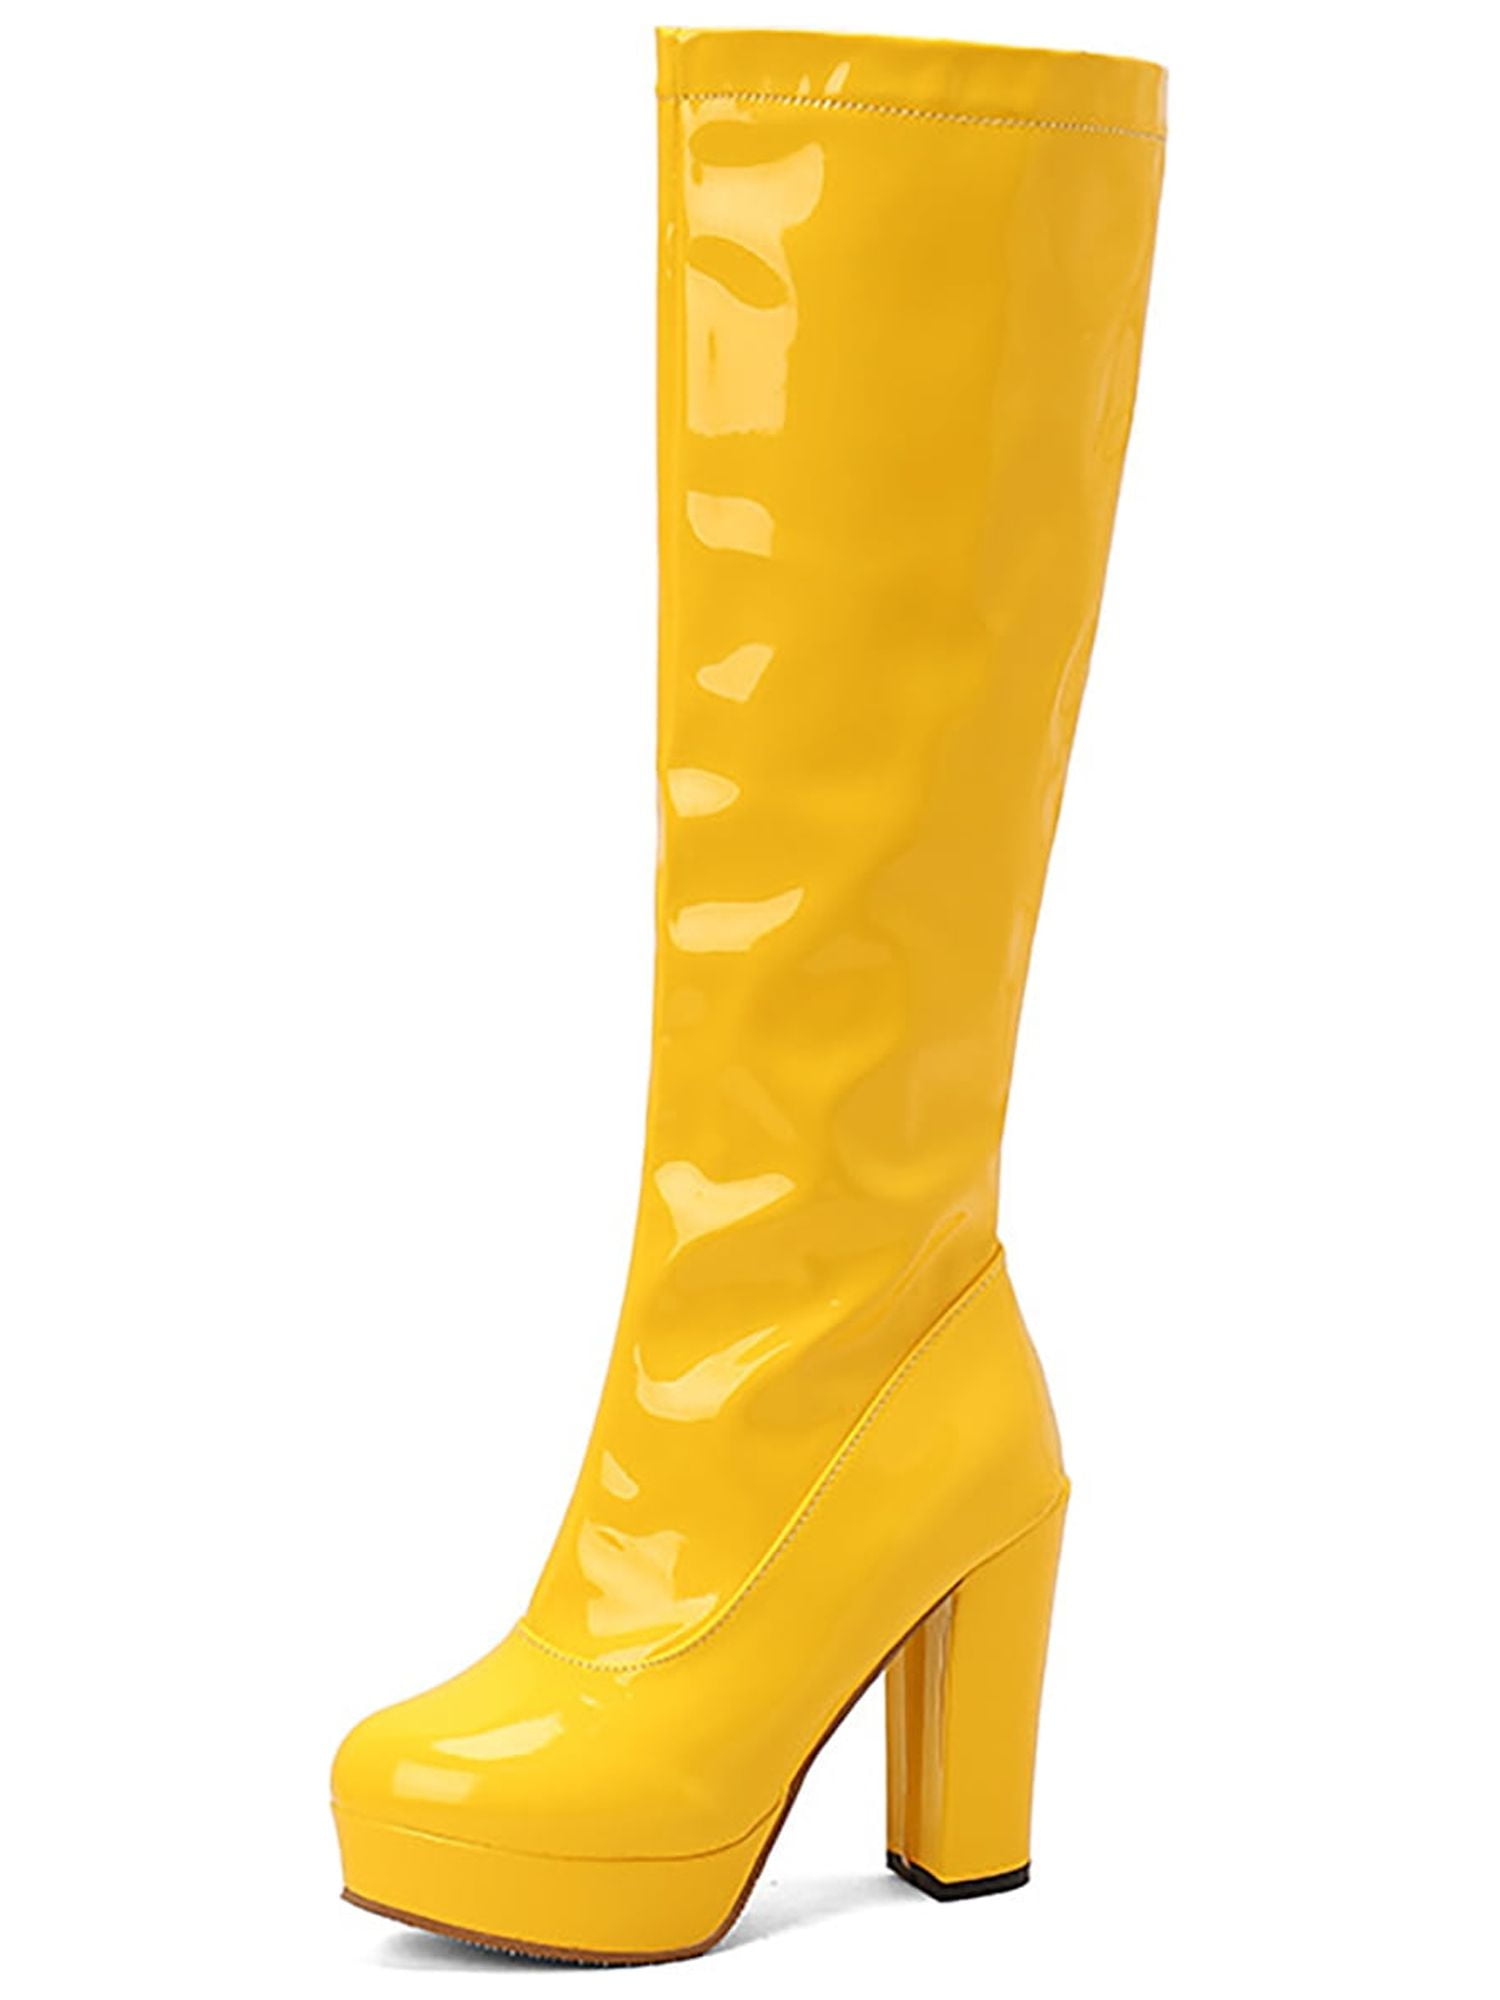 Yellow Leather Mesh Booties Rhinestone Decor Stiletto Ankle Boots